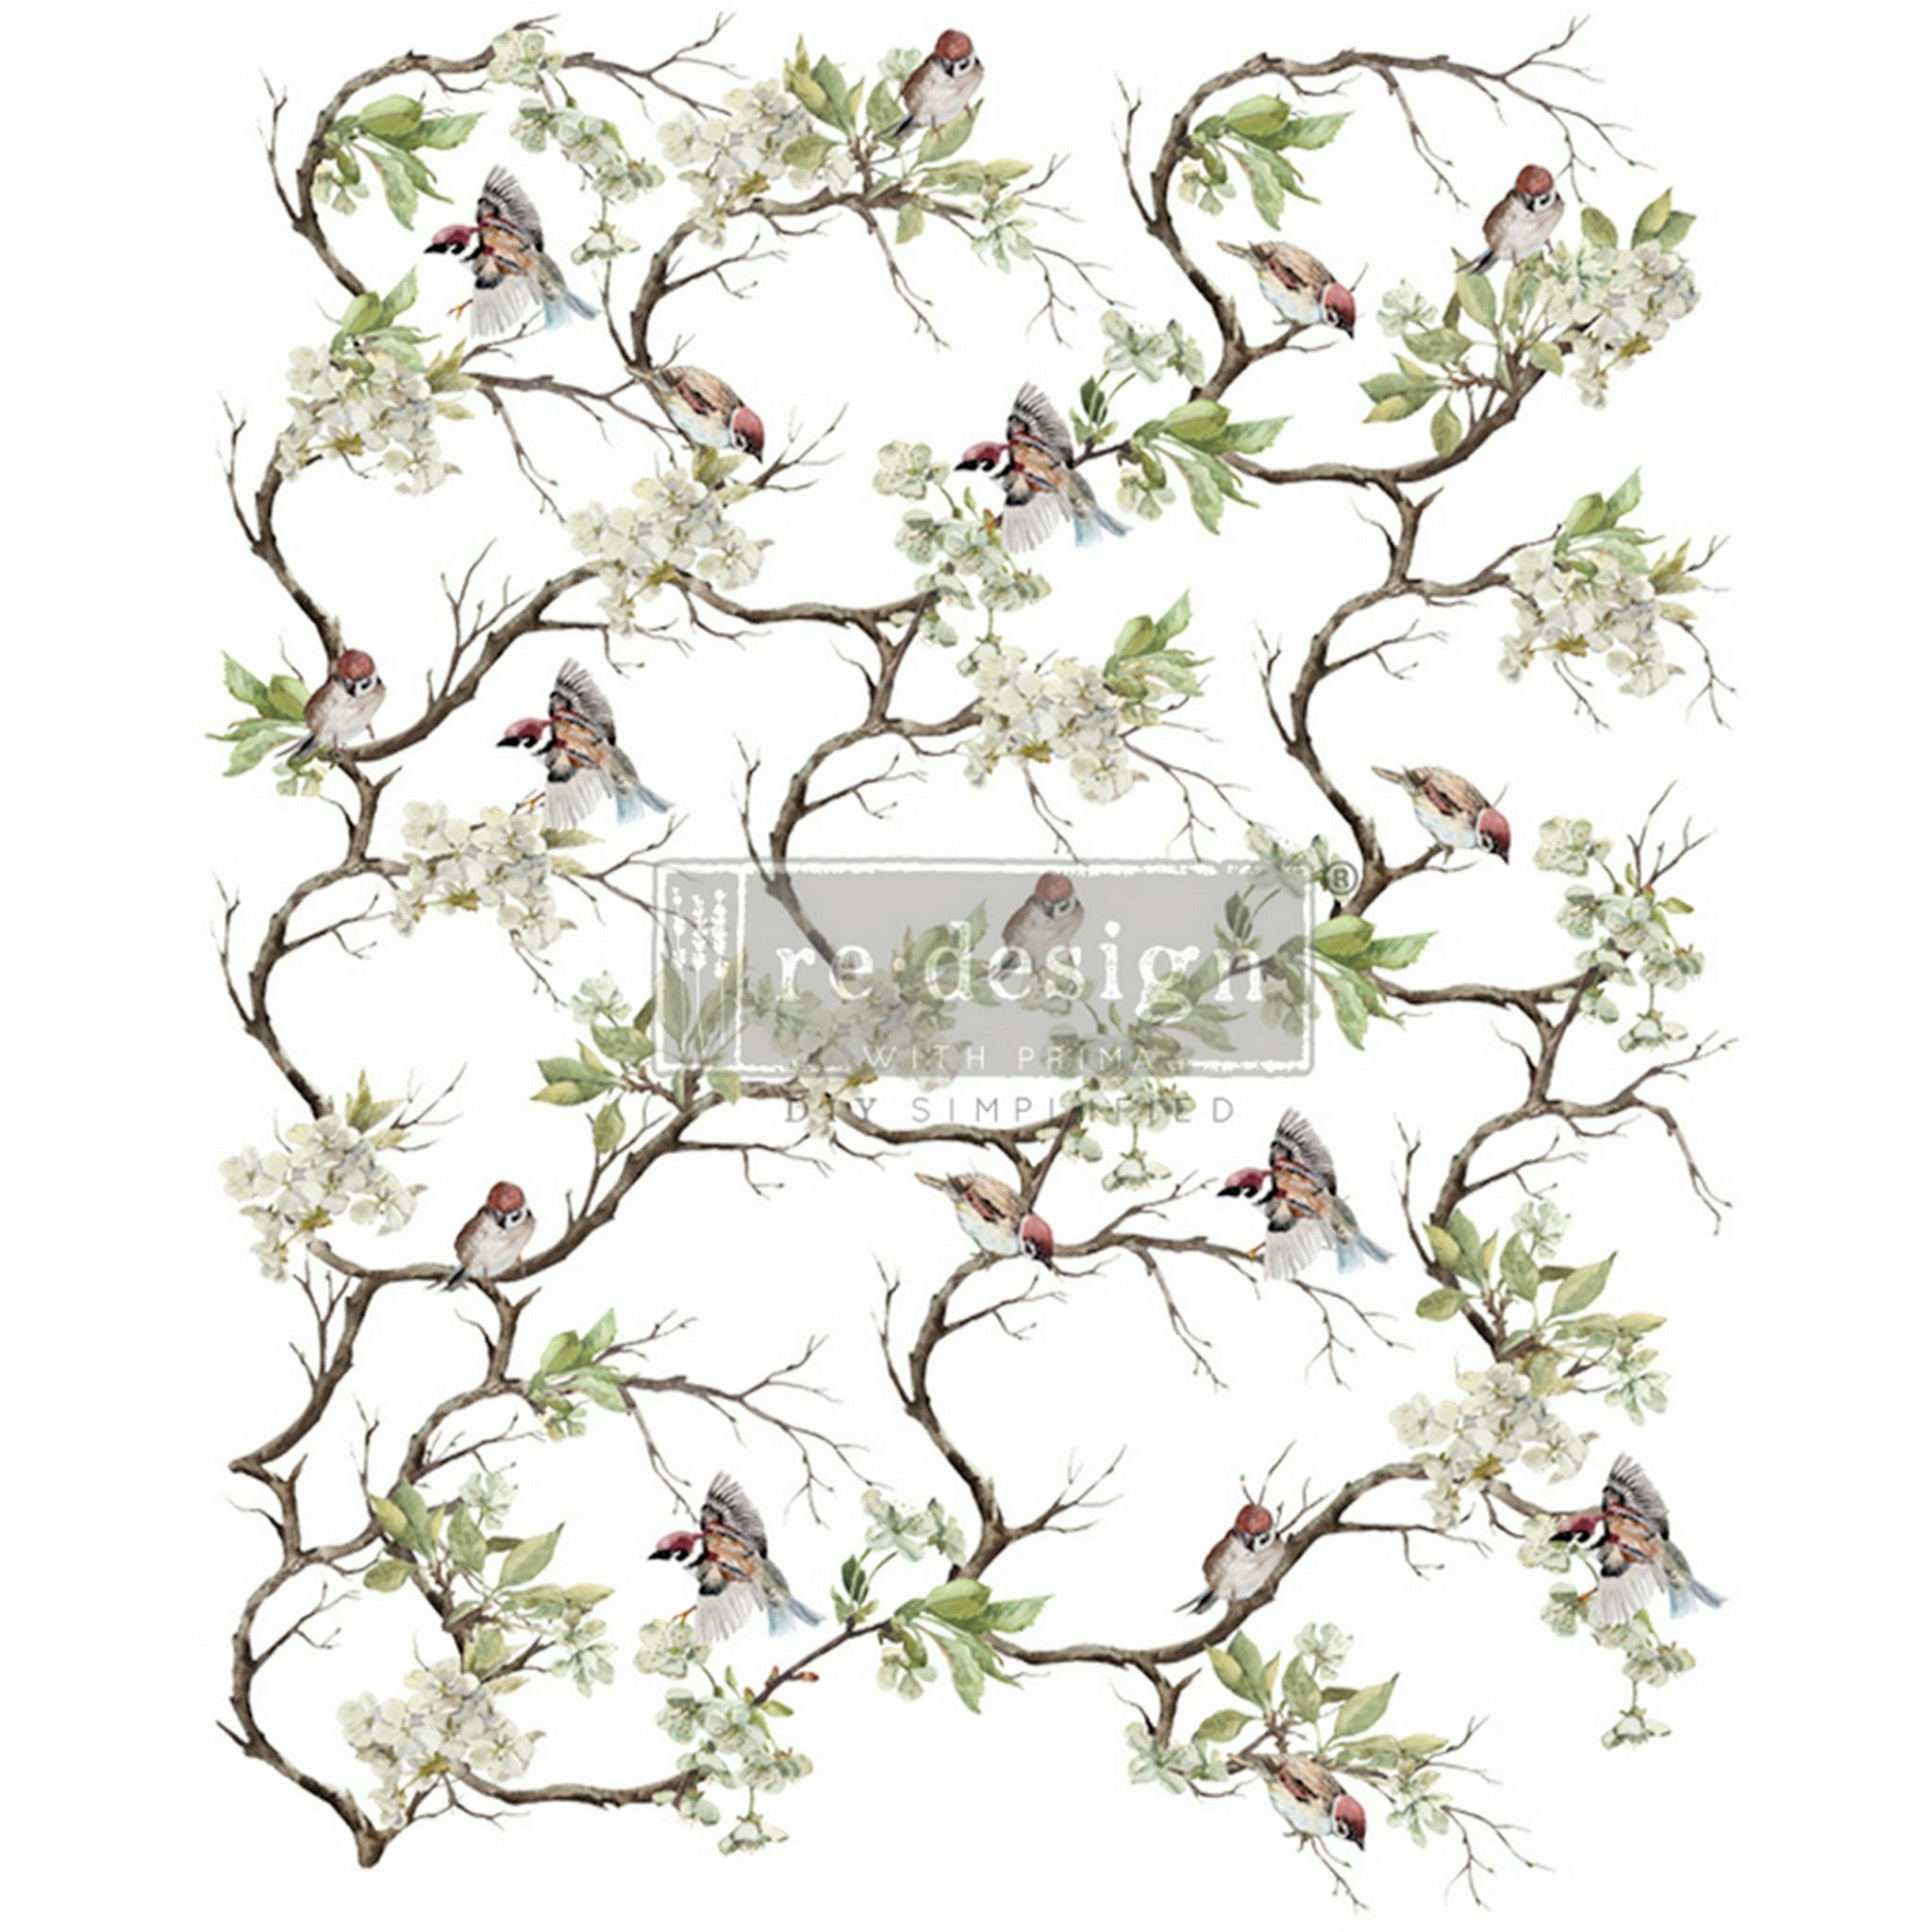 Colorful Blossom Flight transfer design on a white background. A transparent redesign logo on top.